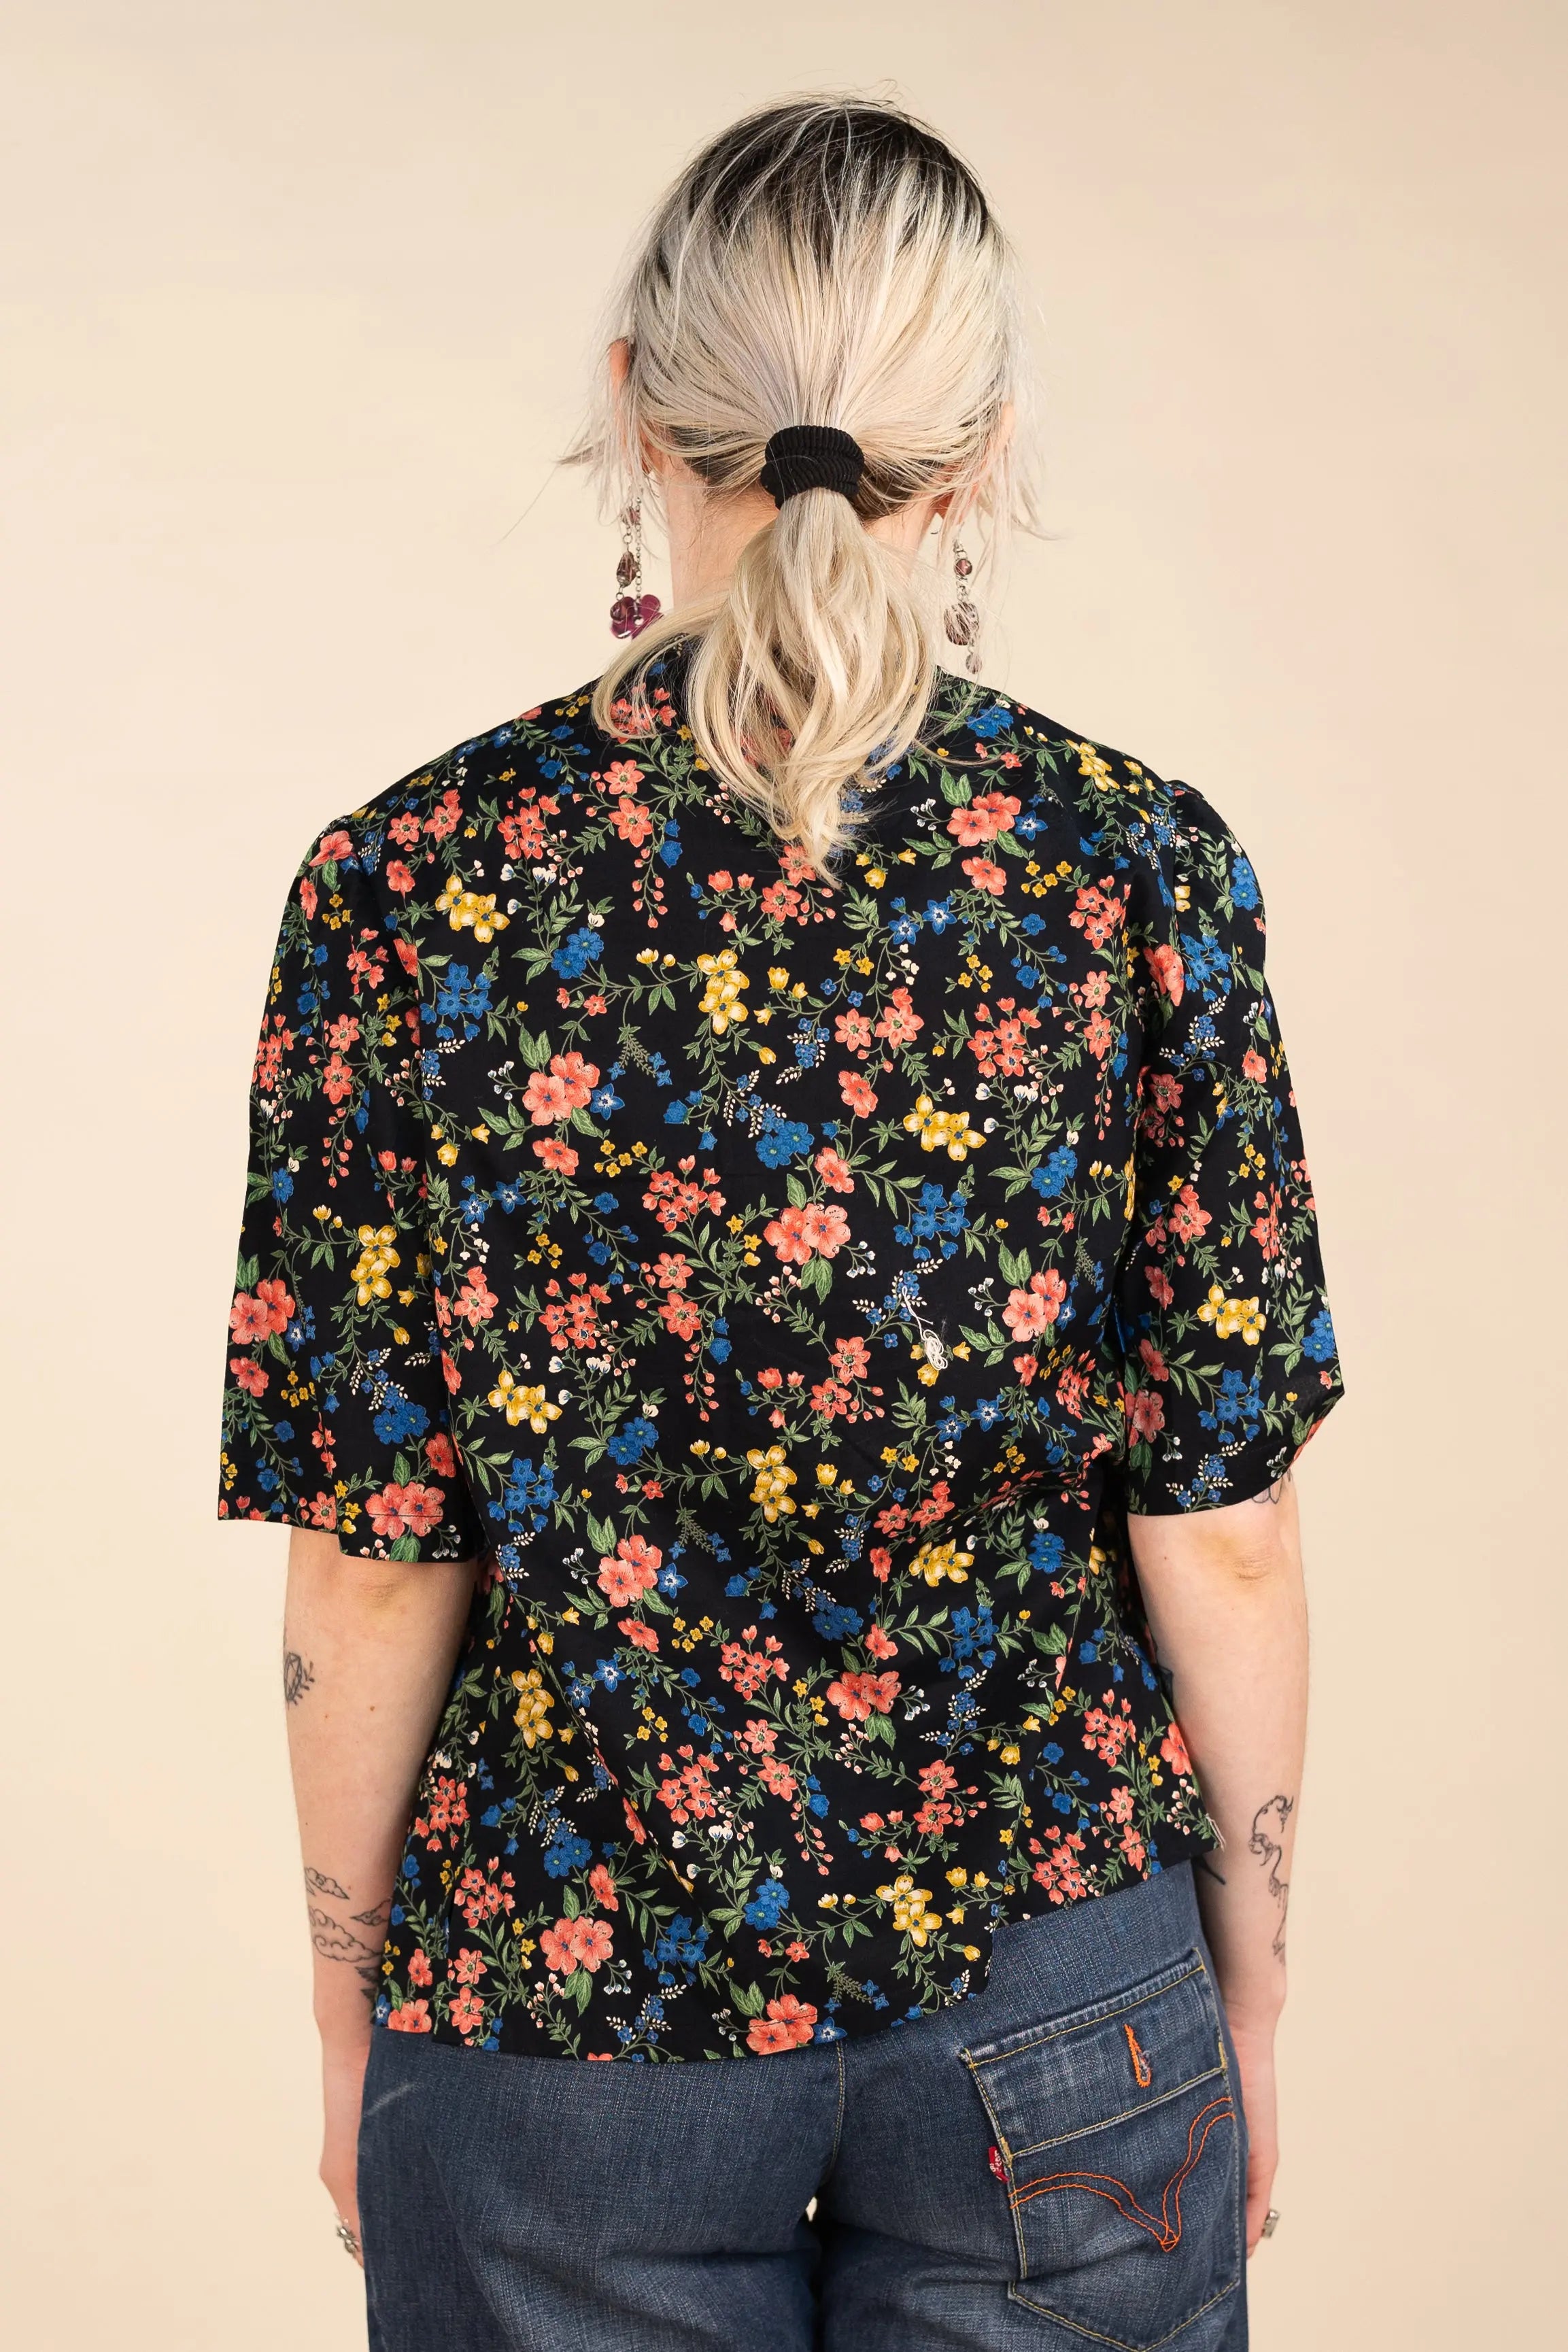 Handmade - Handmade Floral Top- ThriftTale.com - Vintage and second handclothing